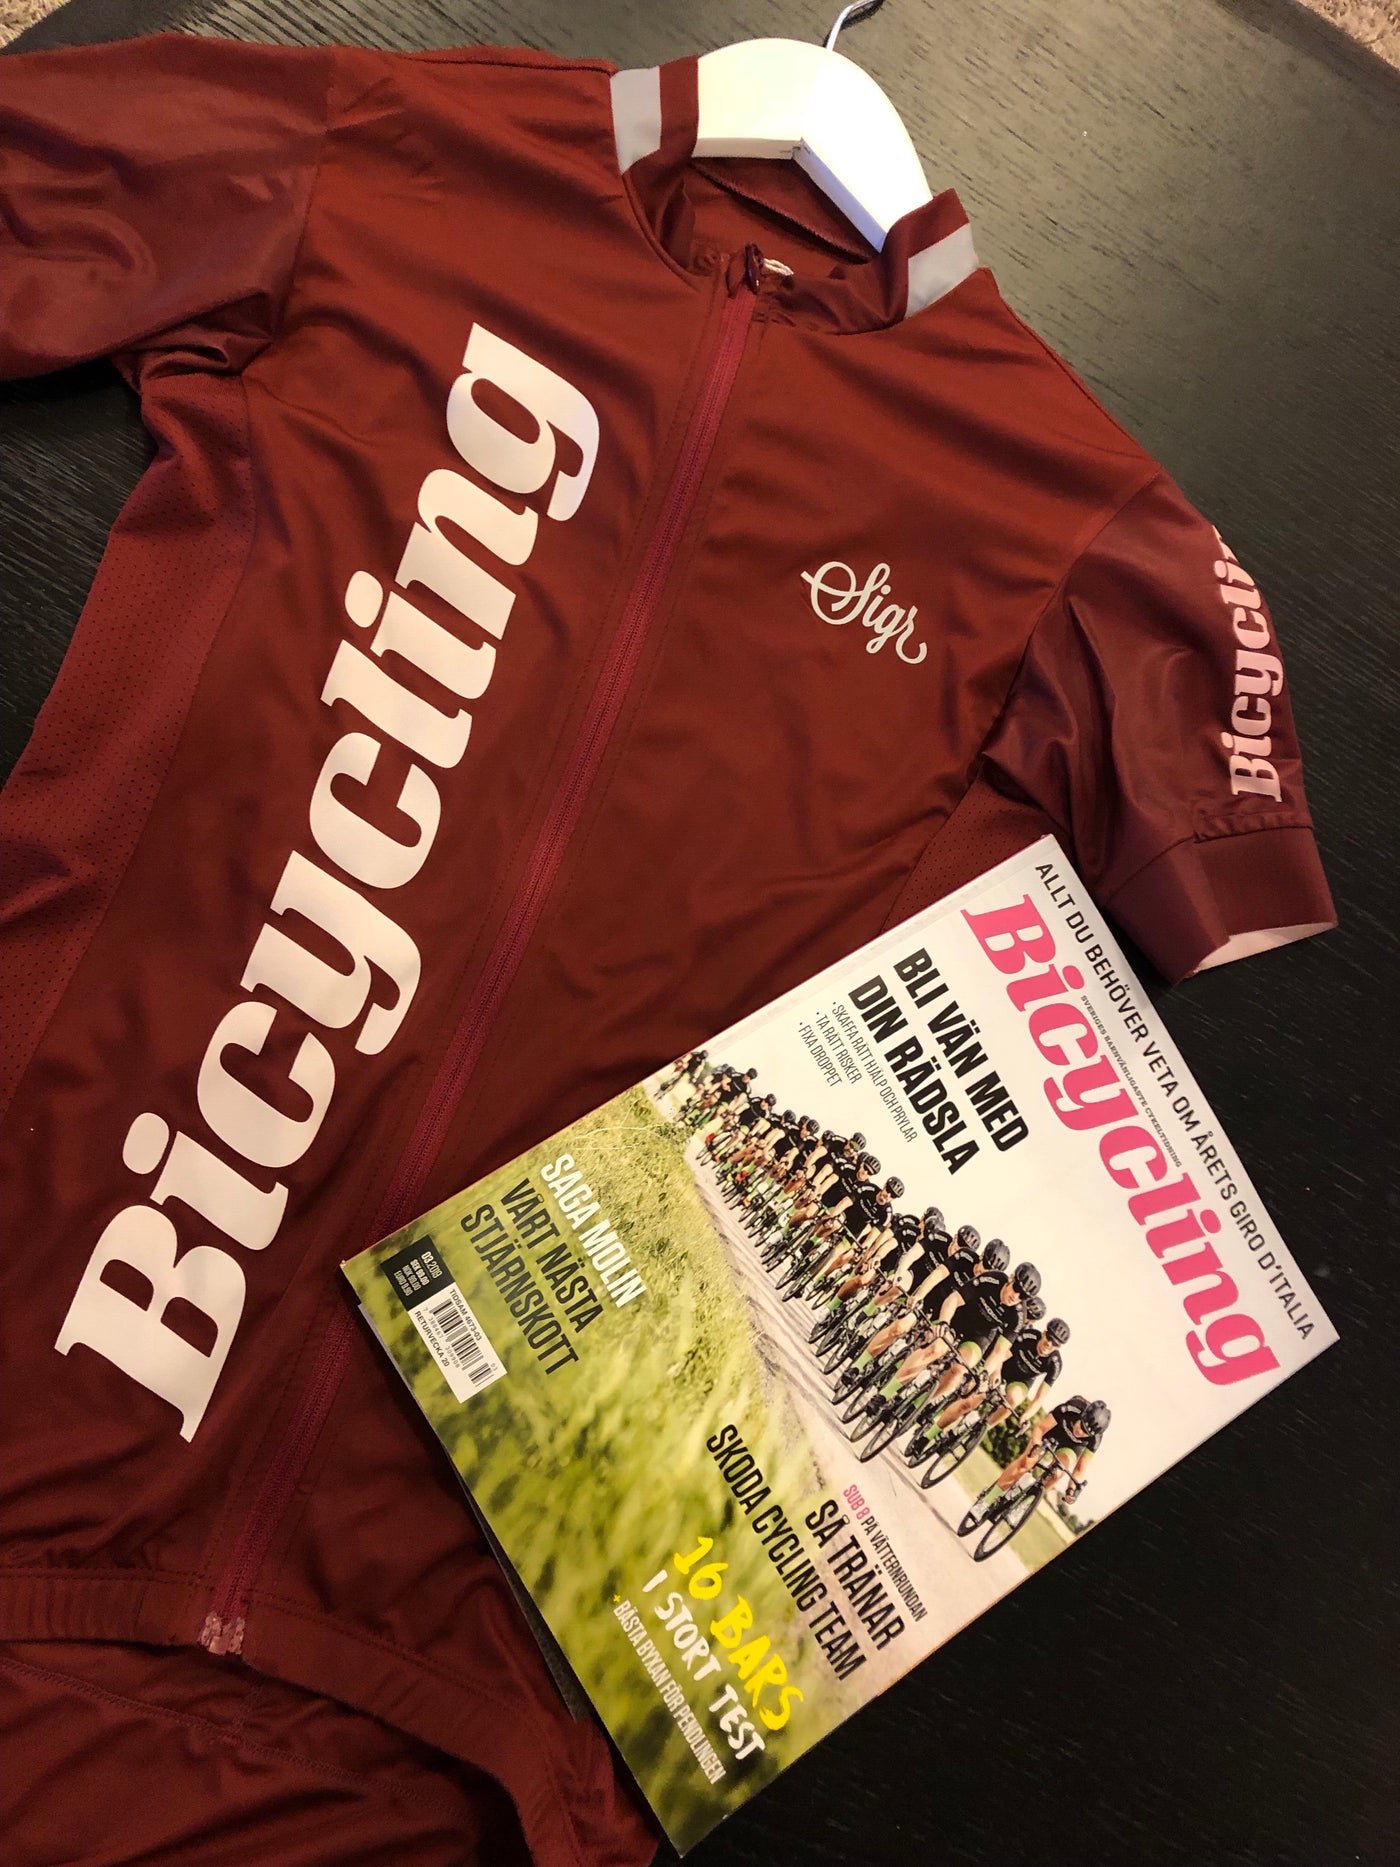 Team Bicycling Magazine - Get the look - this is what they will wear 2019